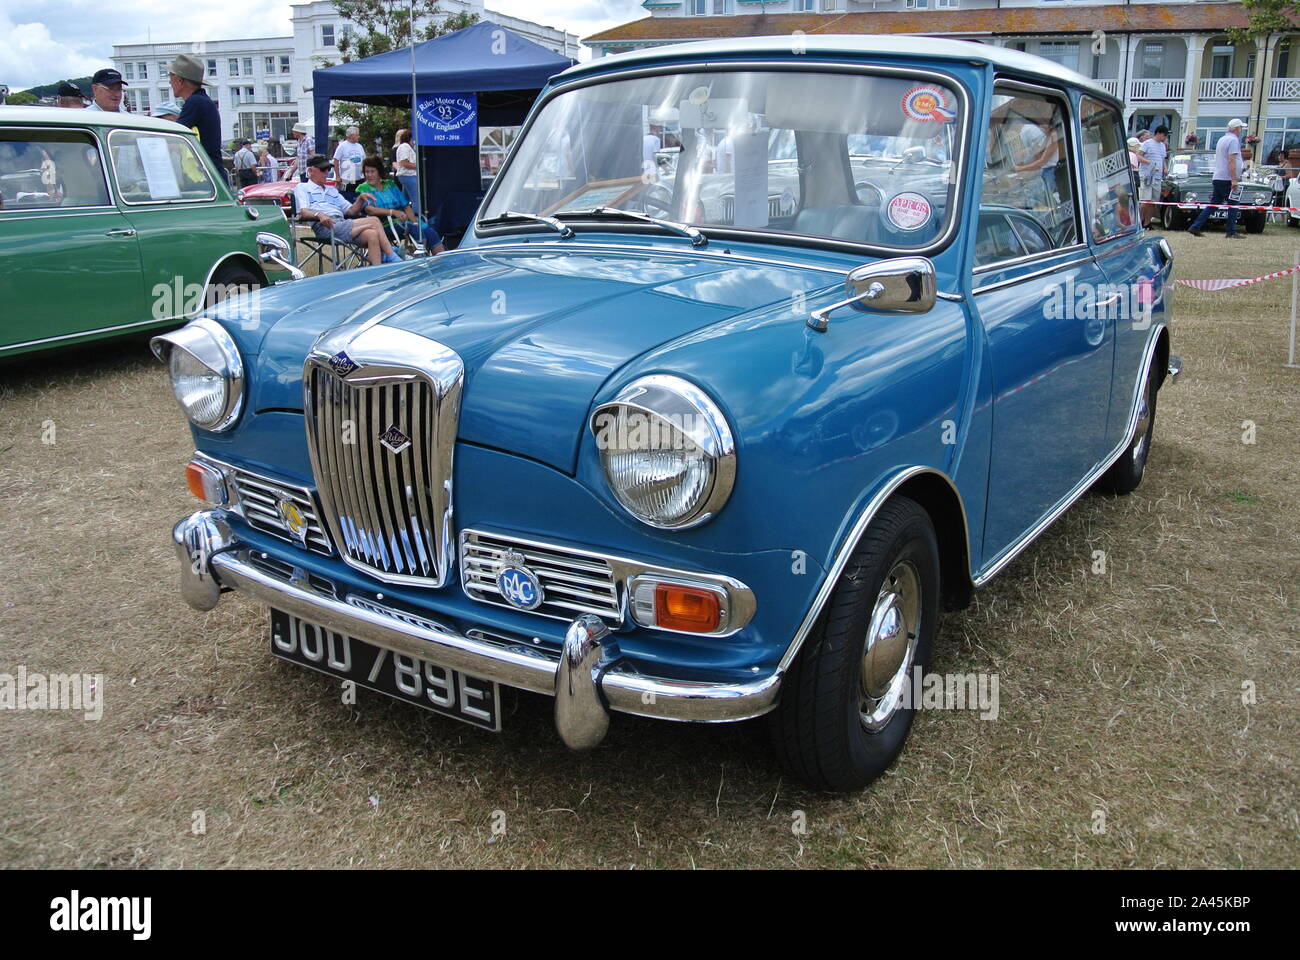 A 1967 Riley Elf parked up on display at the English Riviera classic car show, Paignton, Devon, England, UK. Stock Photo